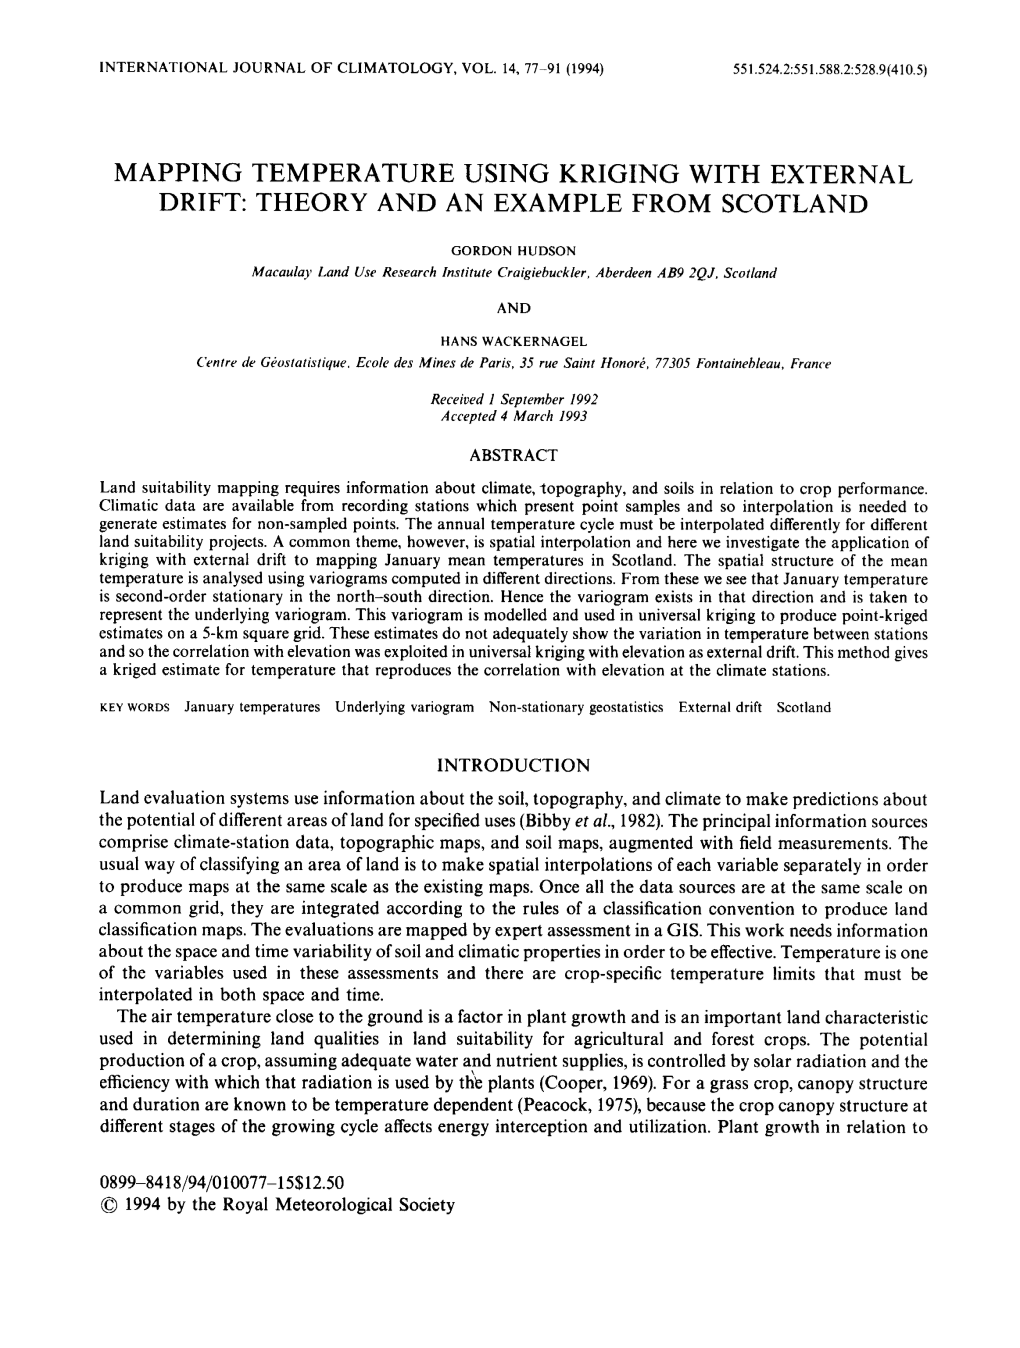 Mapping Temperature Using Kriging with External Drift: Theory and an Example from Scotland